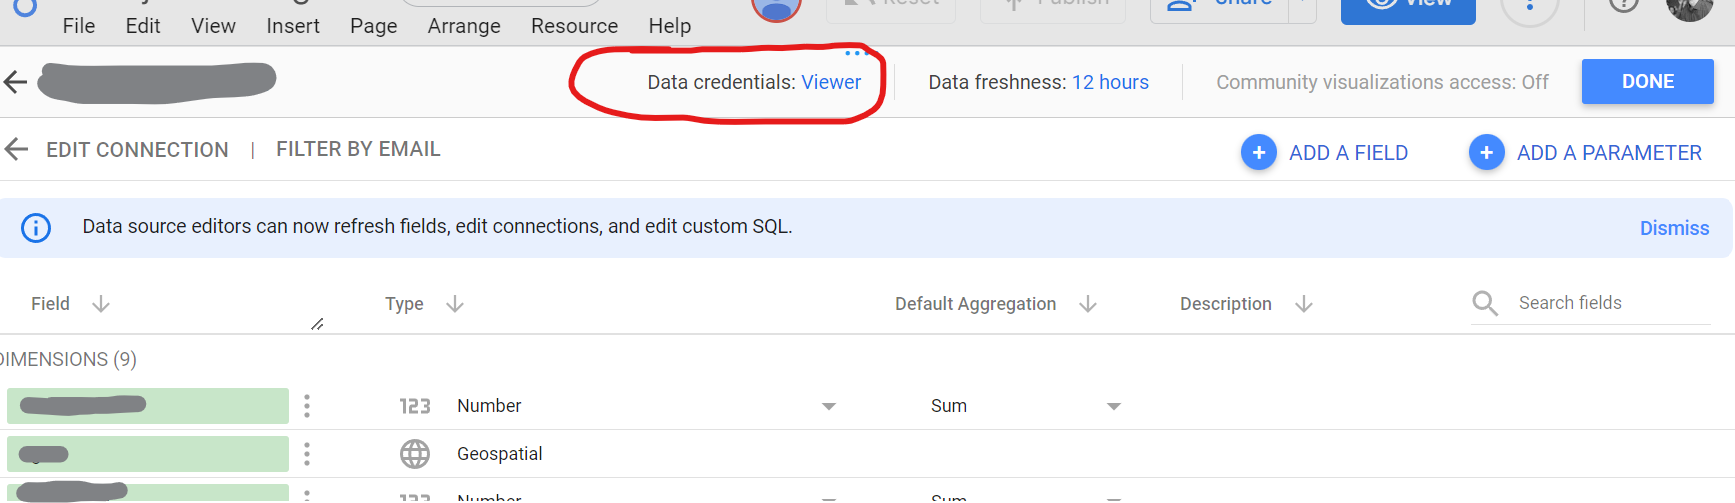 Change BigQuery data source credentials in Looker Studio to enable public sharing.